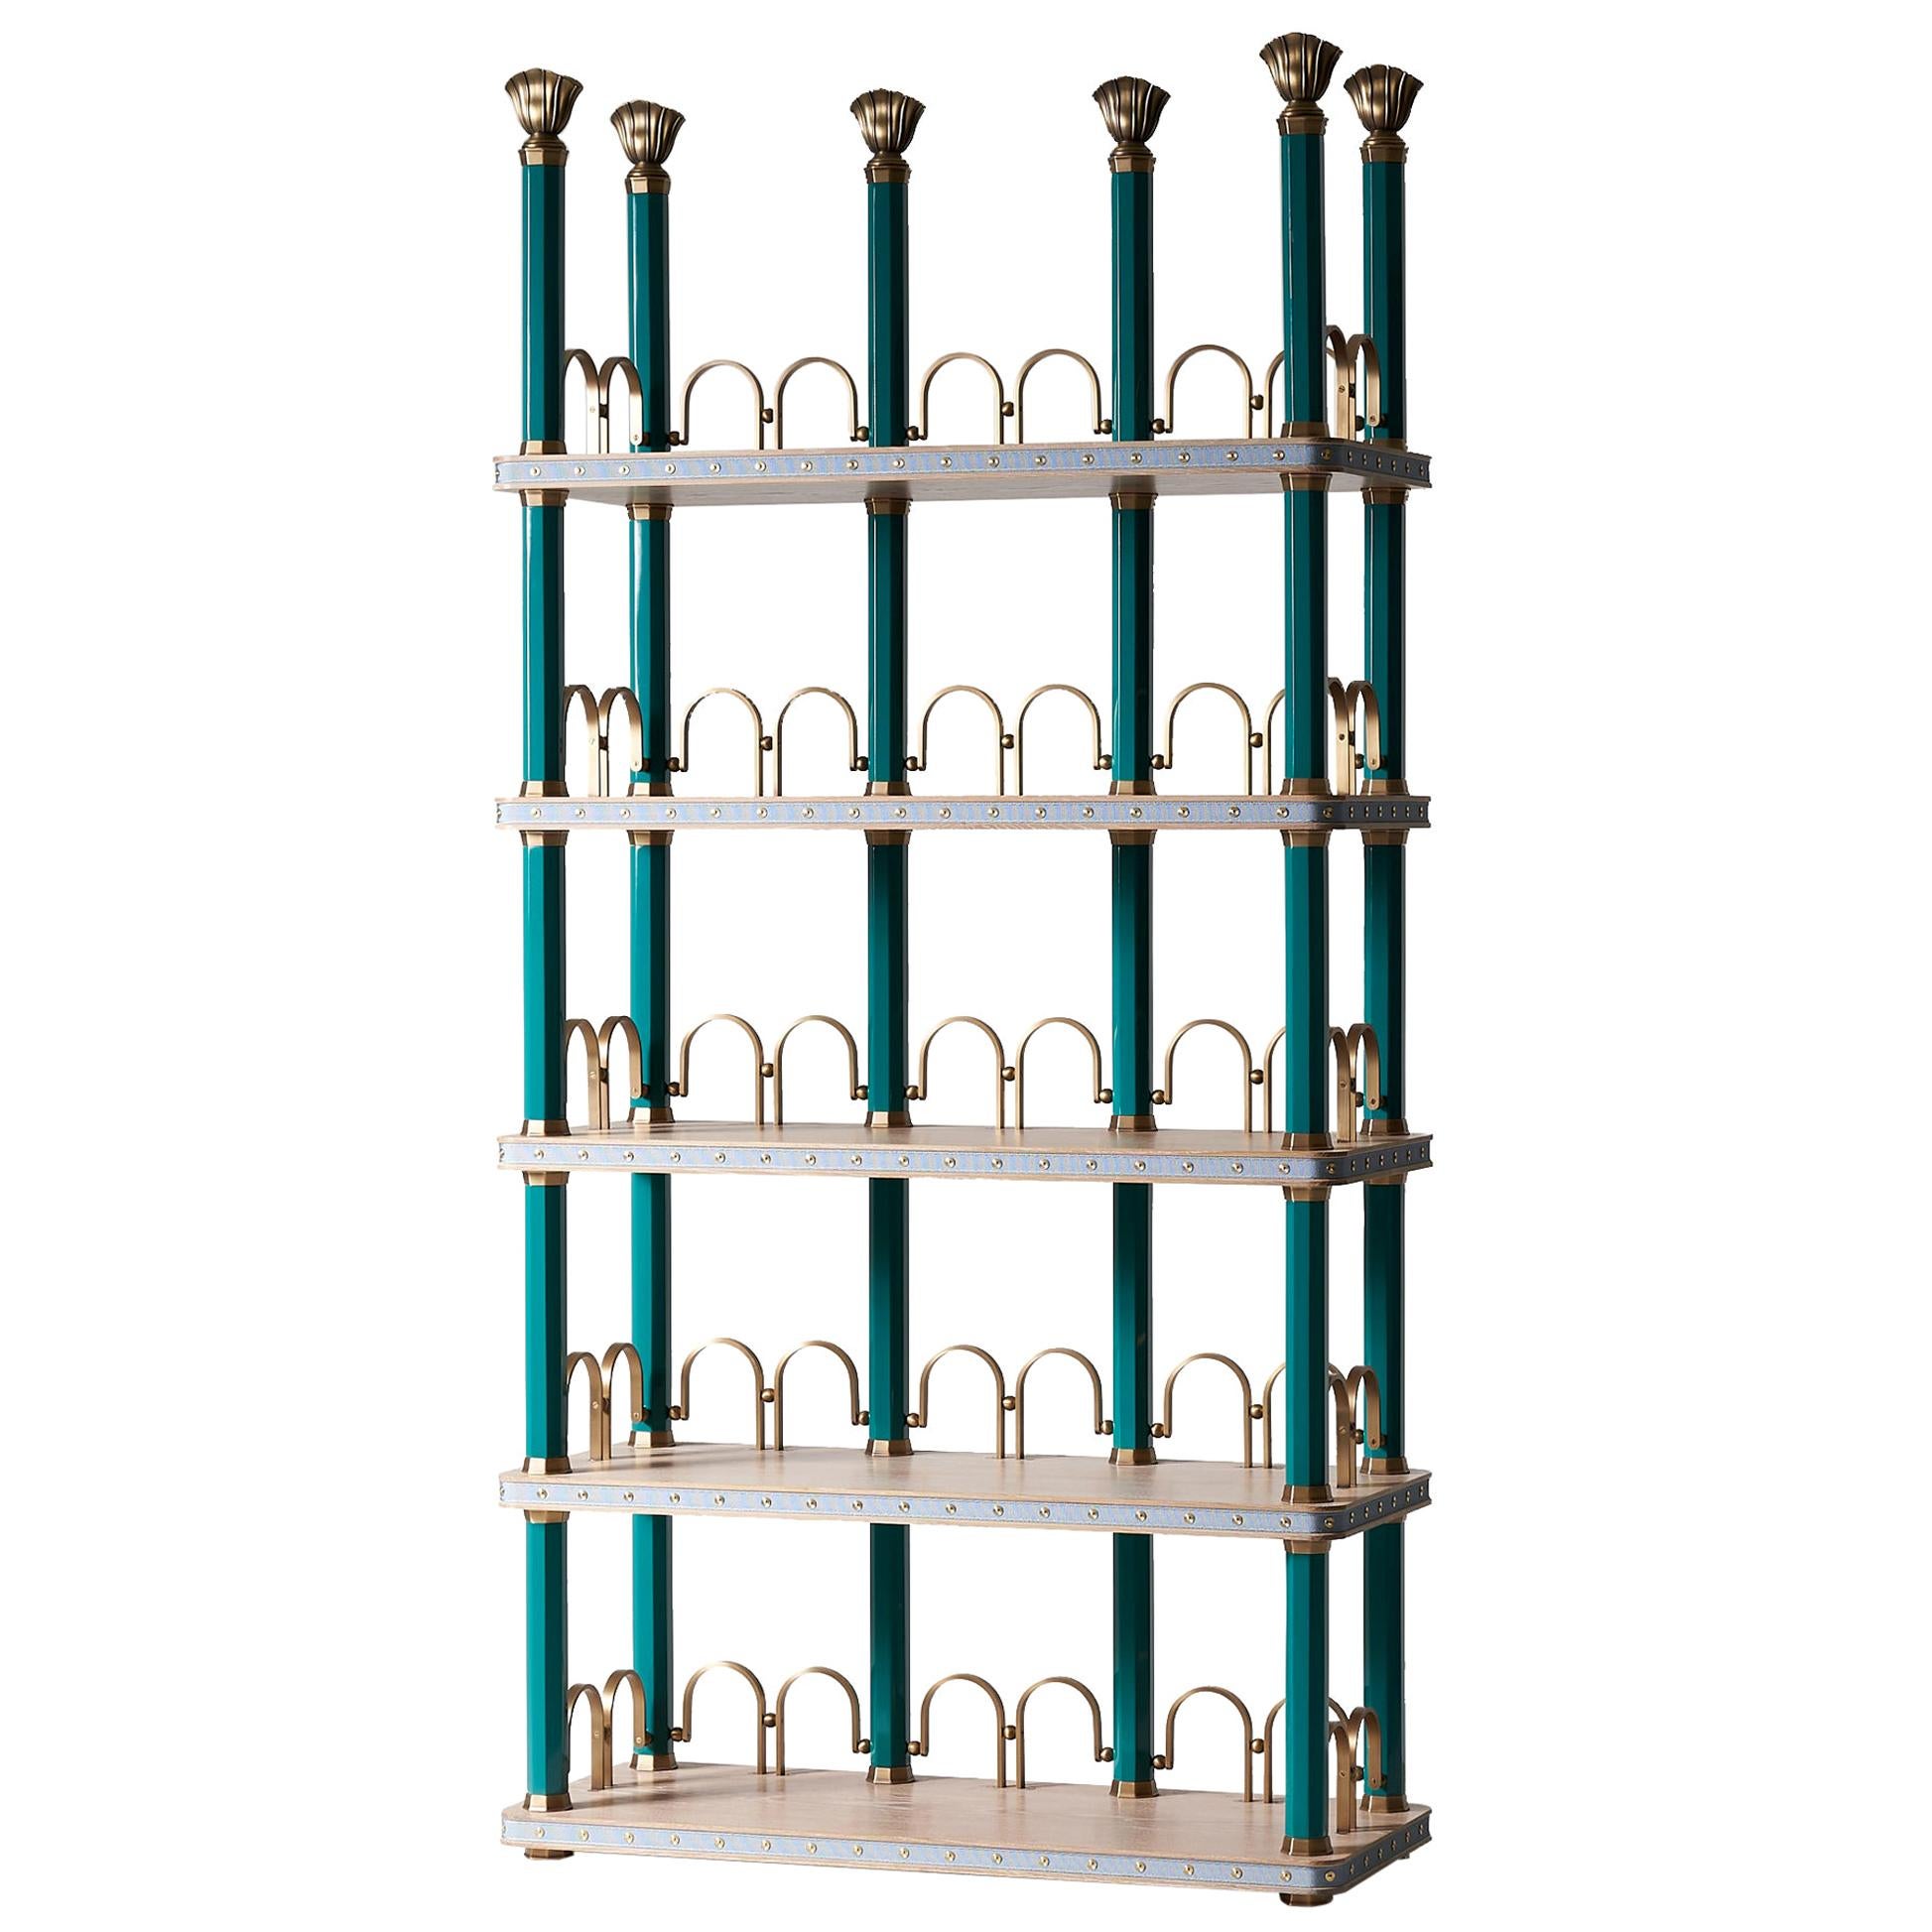 Hambledon Bookcase Shelving - Limed Oak, Brass and Lacquer